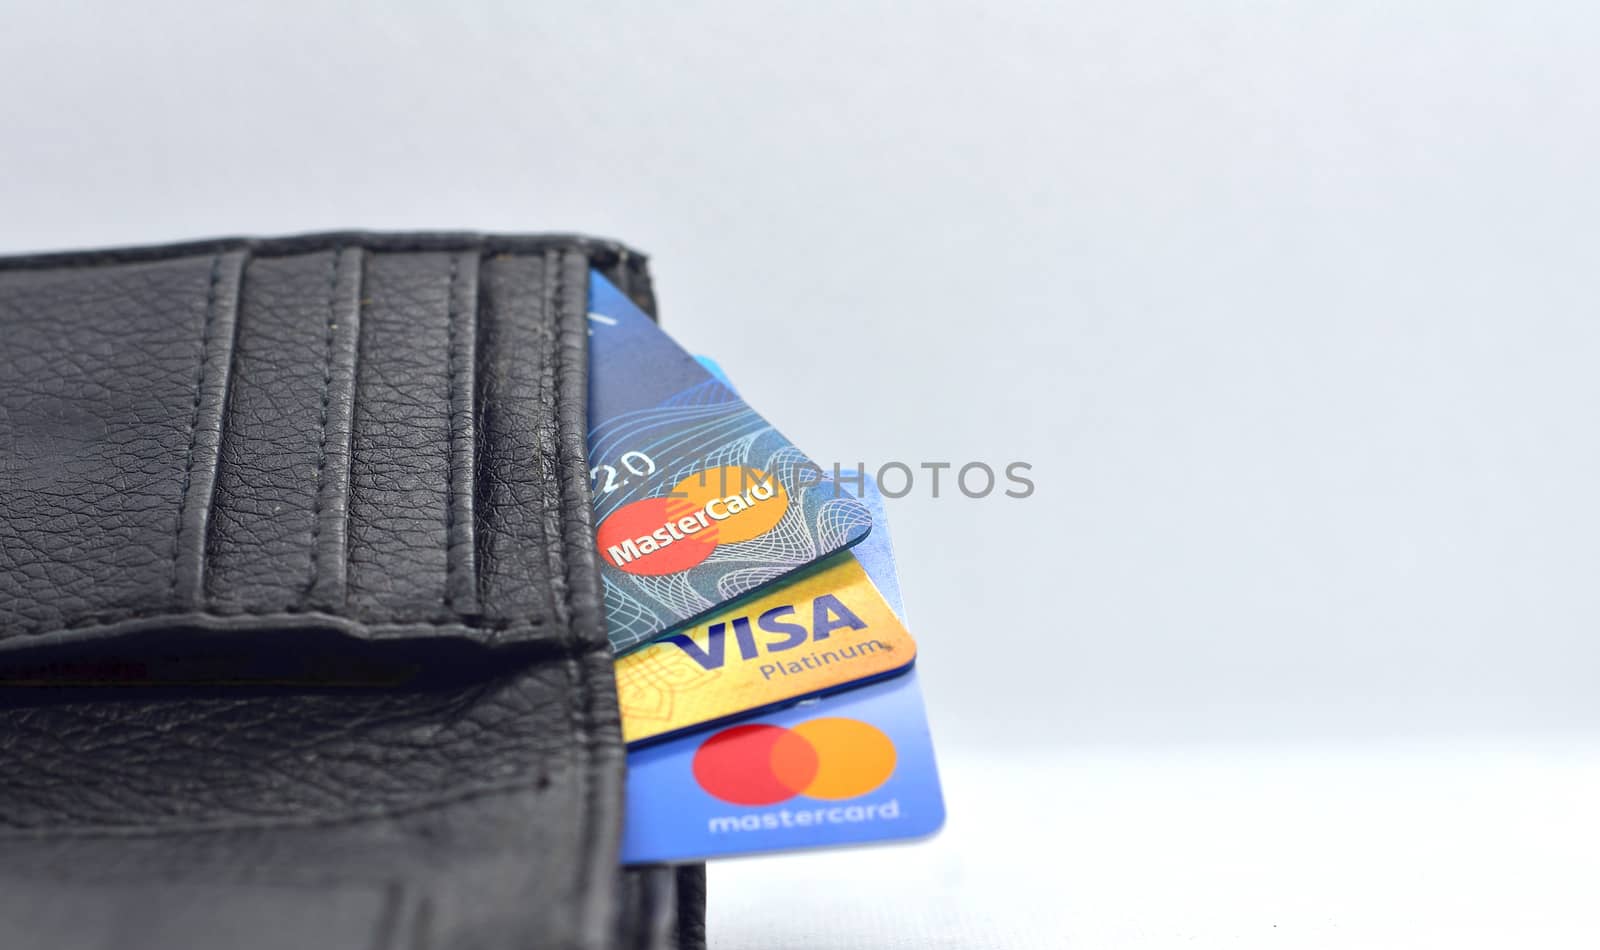 Debit and Credit cards in wallet on white background. side view by rkbalaji